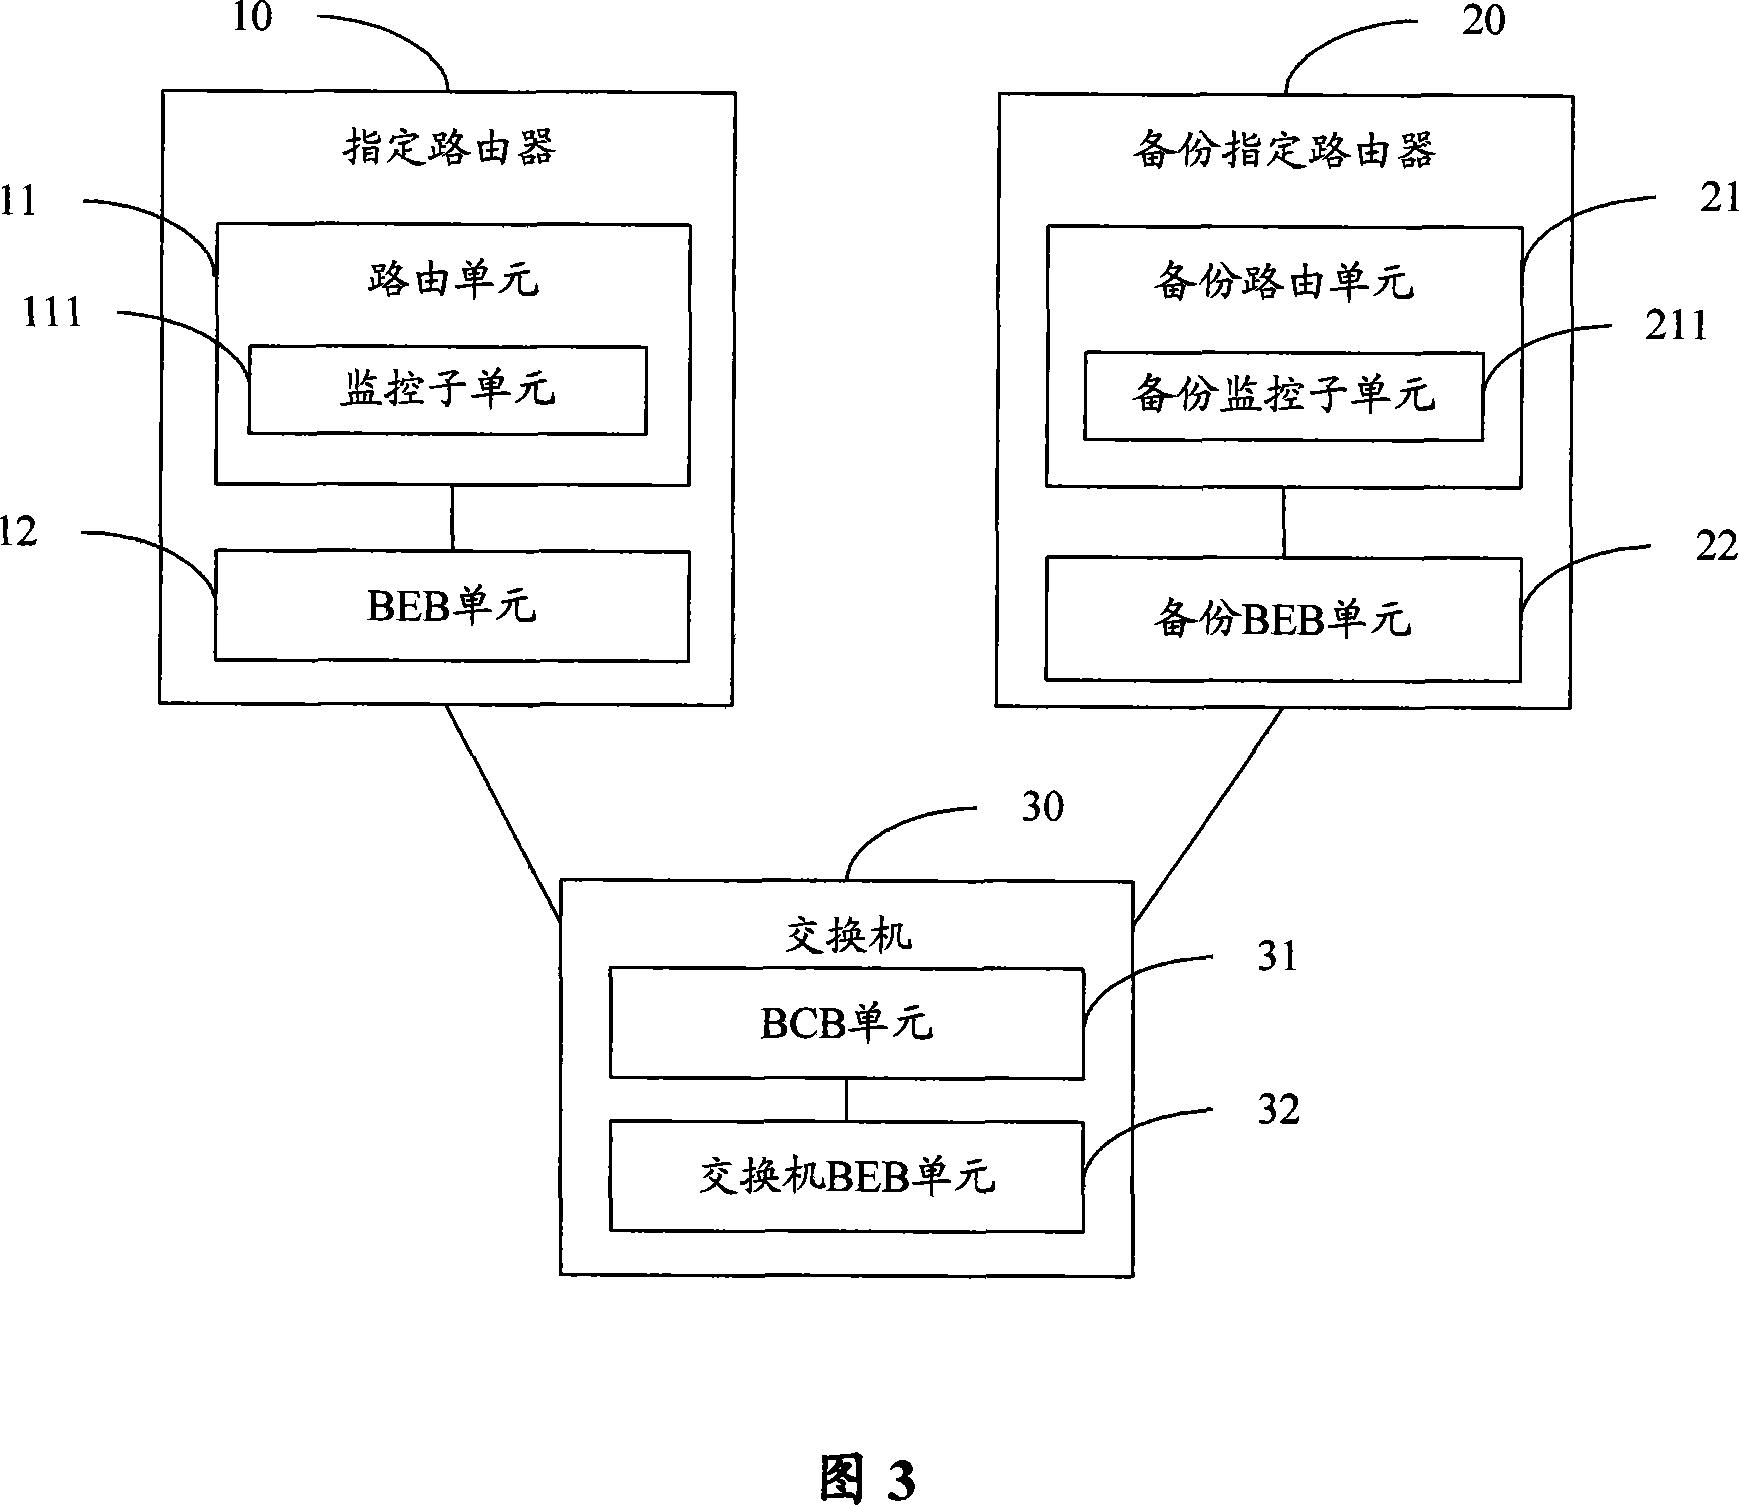 Multicast system, device and method based on 802.1ah protocol in MAN Ethernet network